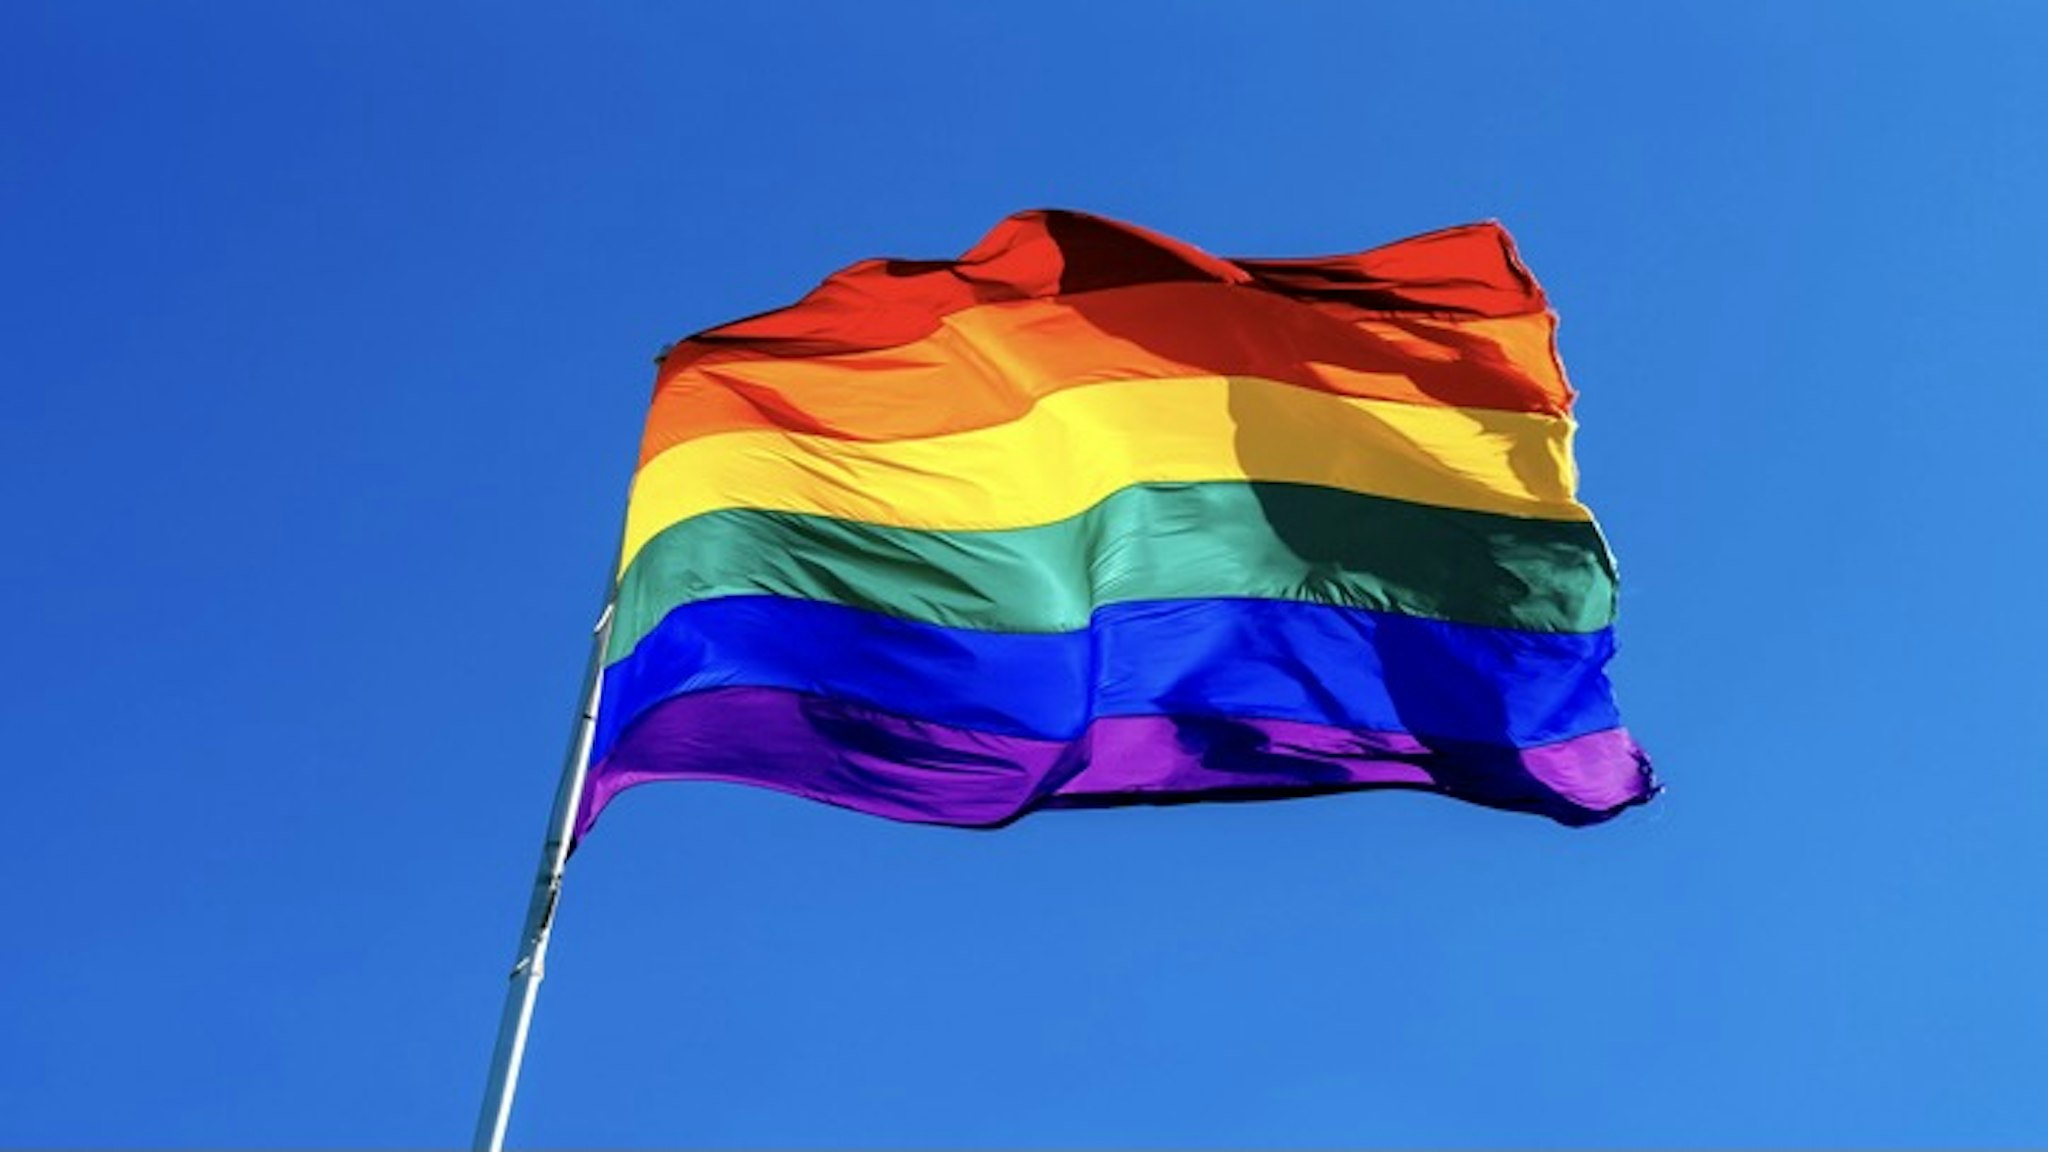 Rainbow flag waving in the wind against clear blue sky - stock photo